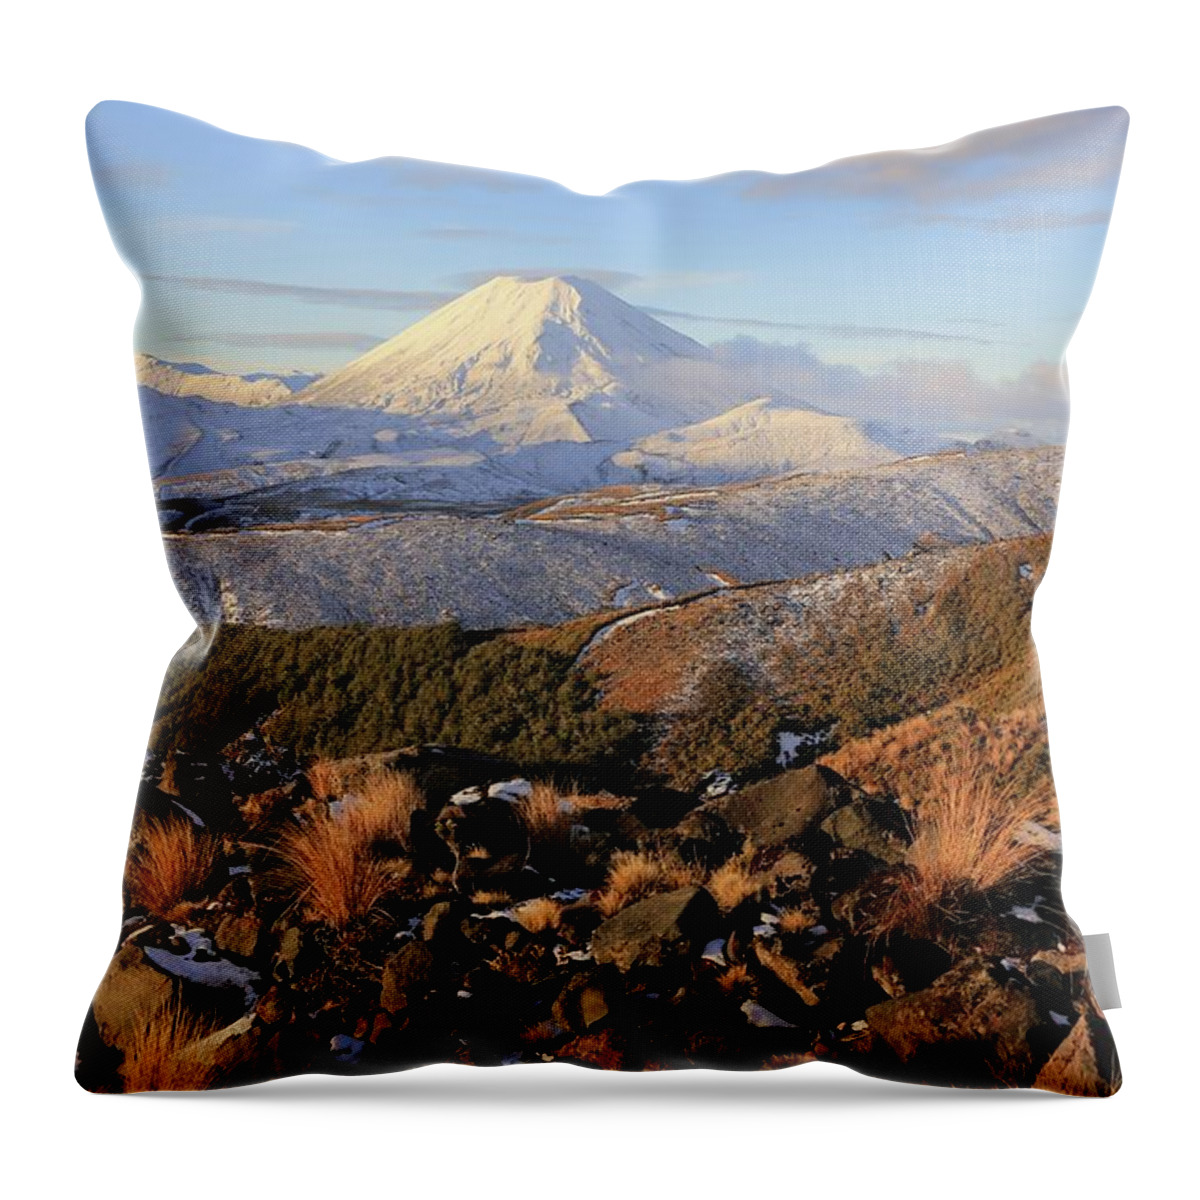 Scenics Throw Pillow featuring the photograph Tongariro National Park Mountains by Ngaire Lawson